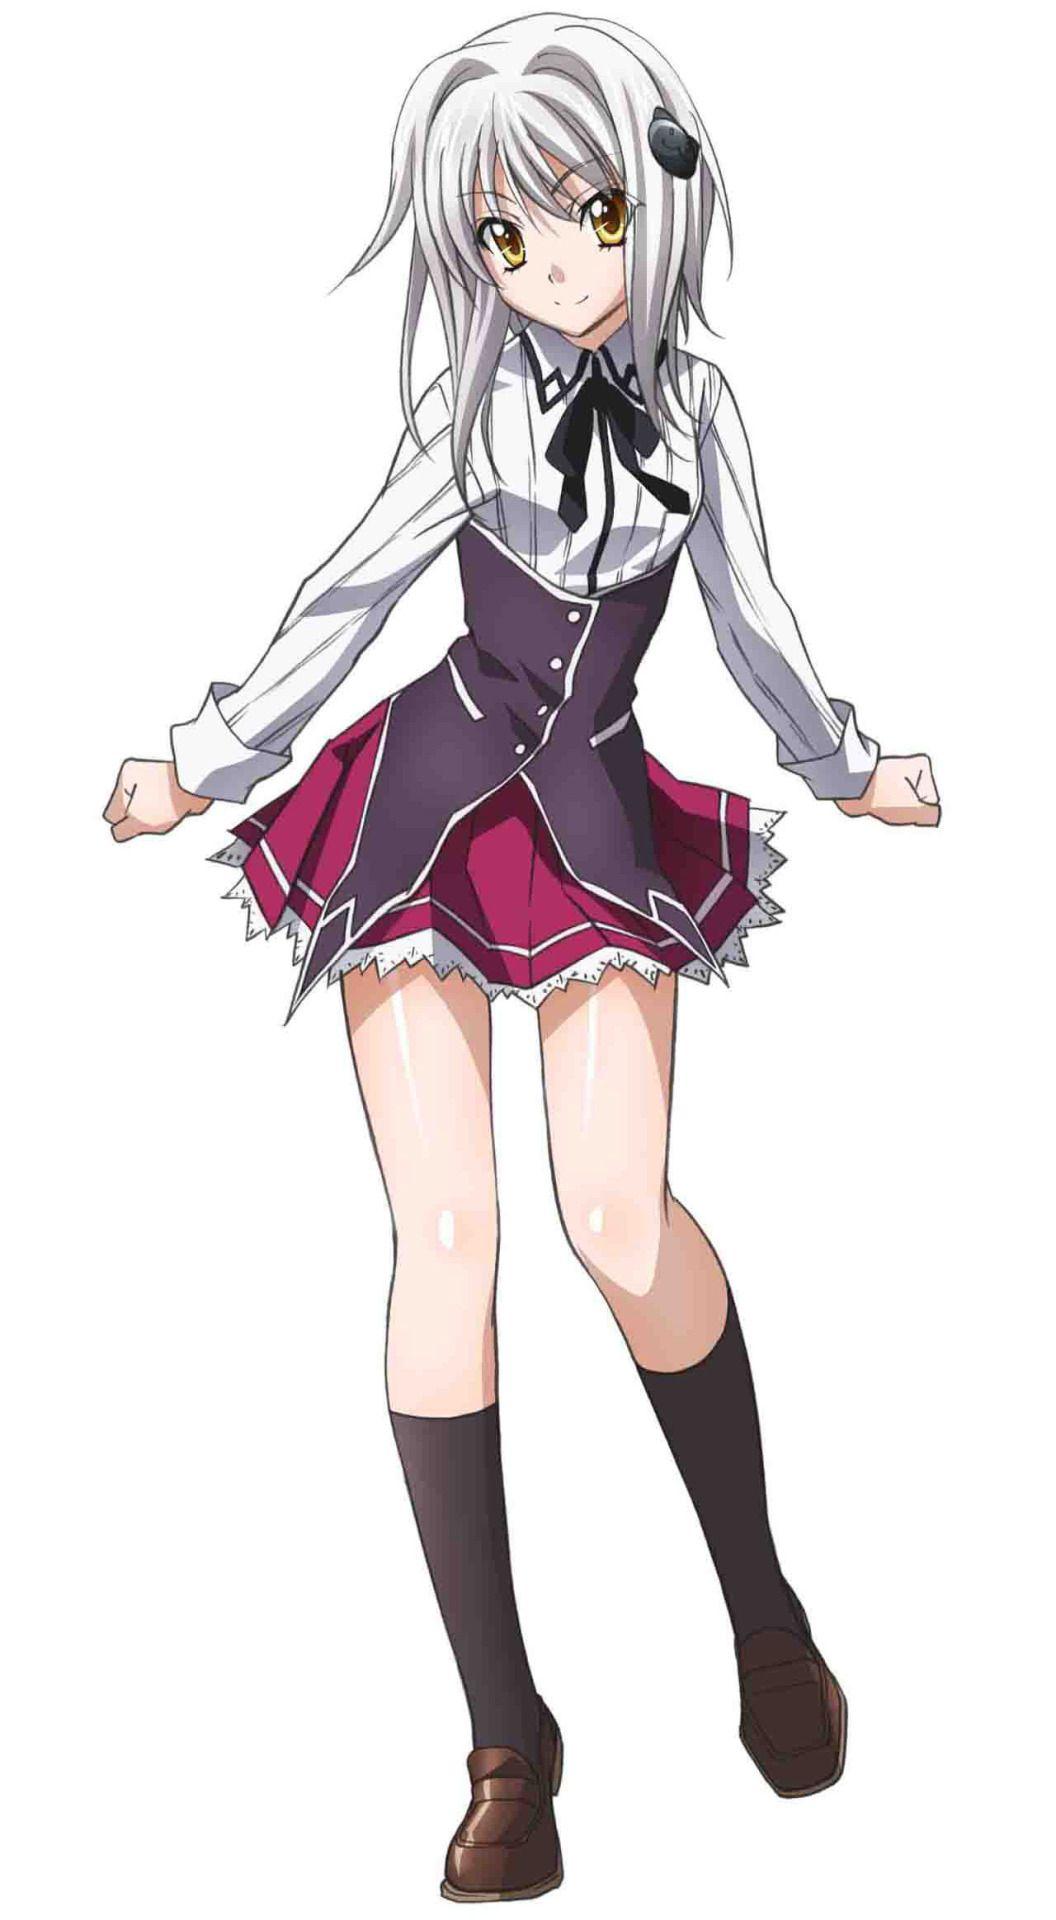 The Best Girl of the Day is Koneko Toujo from High School DxD